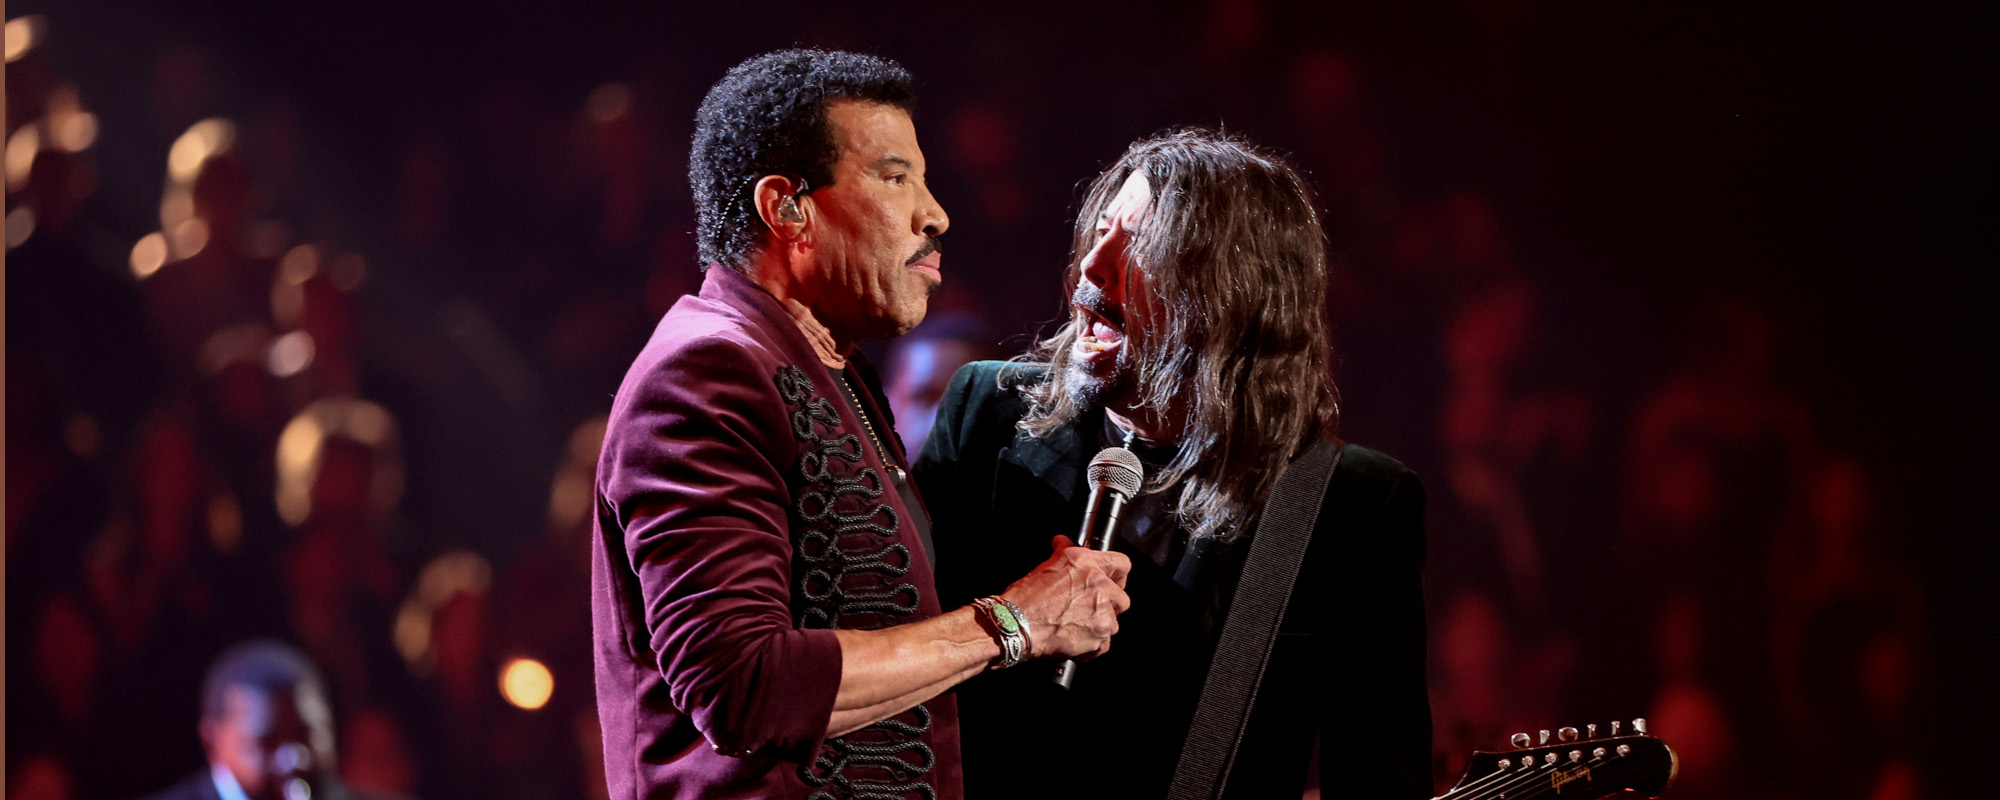 Dave Grohl Joins Lionel Richie for Performance of “Easy” at Rock and Roll HOF Ceremony